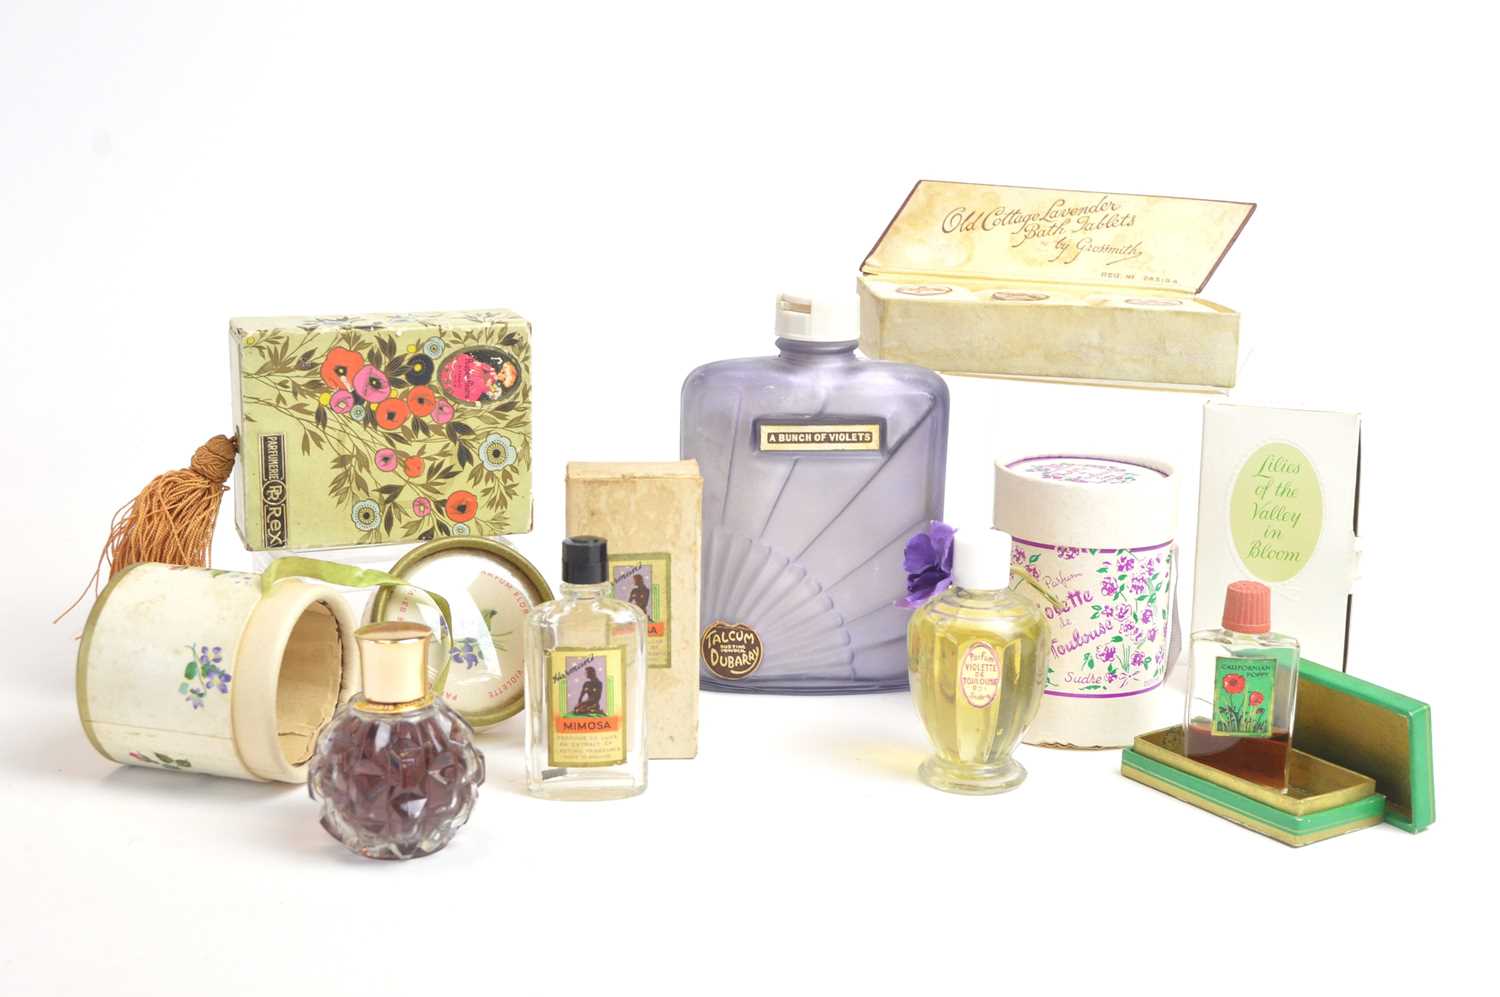 1930s and later perfumes and talcum powder of a violet or floral note